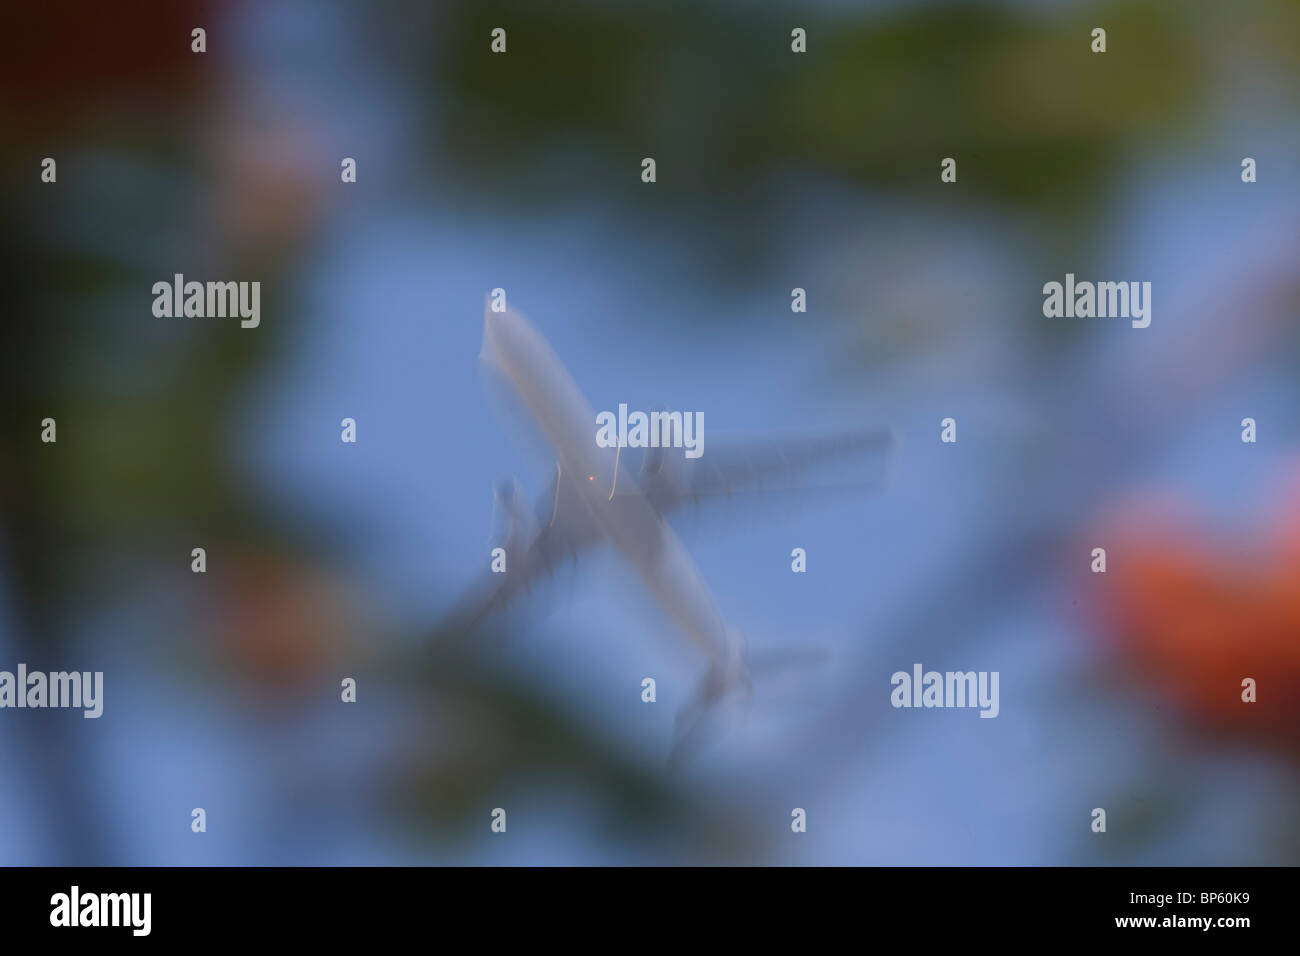 Seen through garden trees, a jet airliner passes overhead in bright skies, blurred purposely using a slow camera speed. Stock Photo